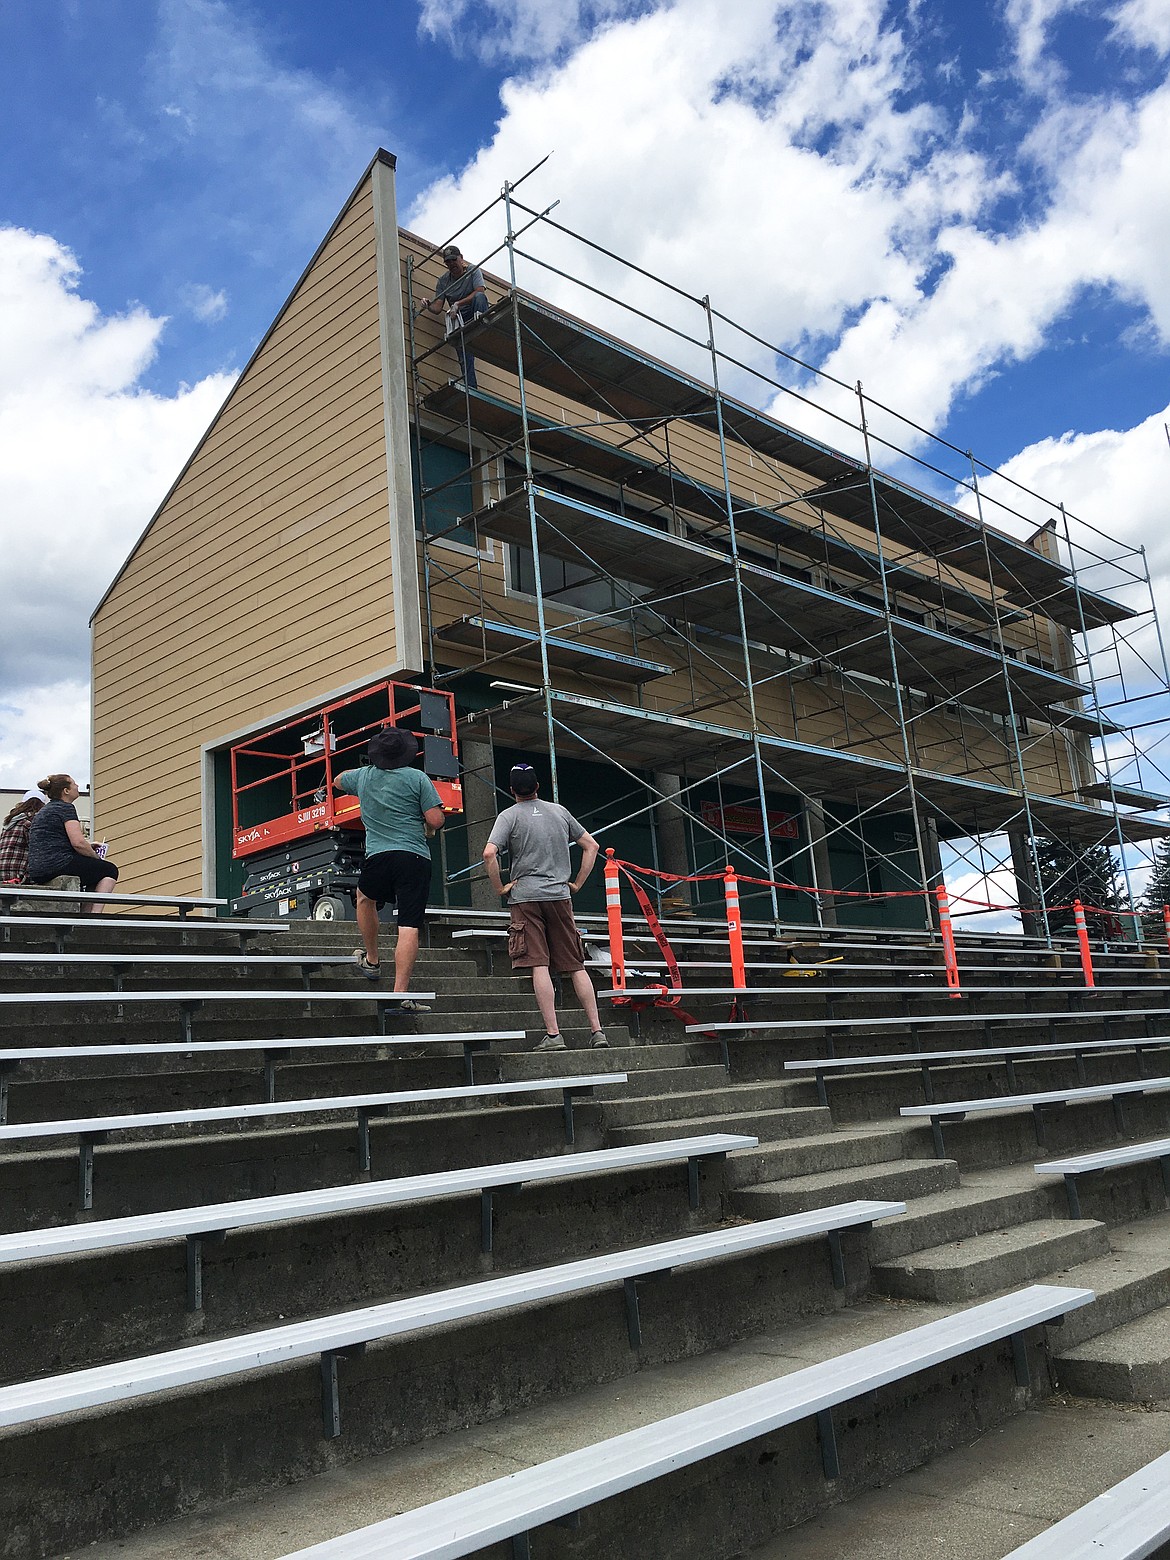 Volunteers climb scaffolding to refurbish the Lakeland High School press box/concession stand, a legacy project jump-started by $4,000 invested by the class of 2020. The finishing touches are now being put on the project, which will be complete by the end of summer.